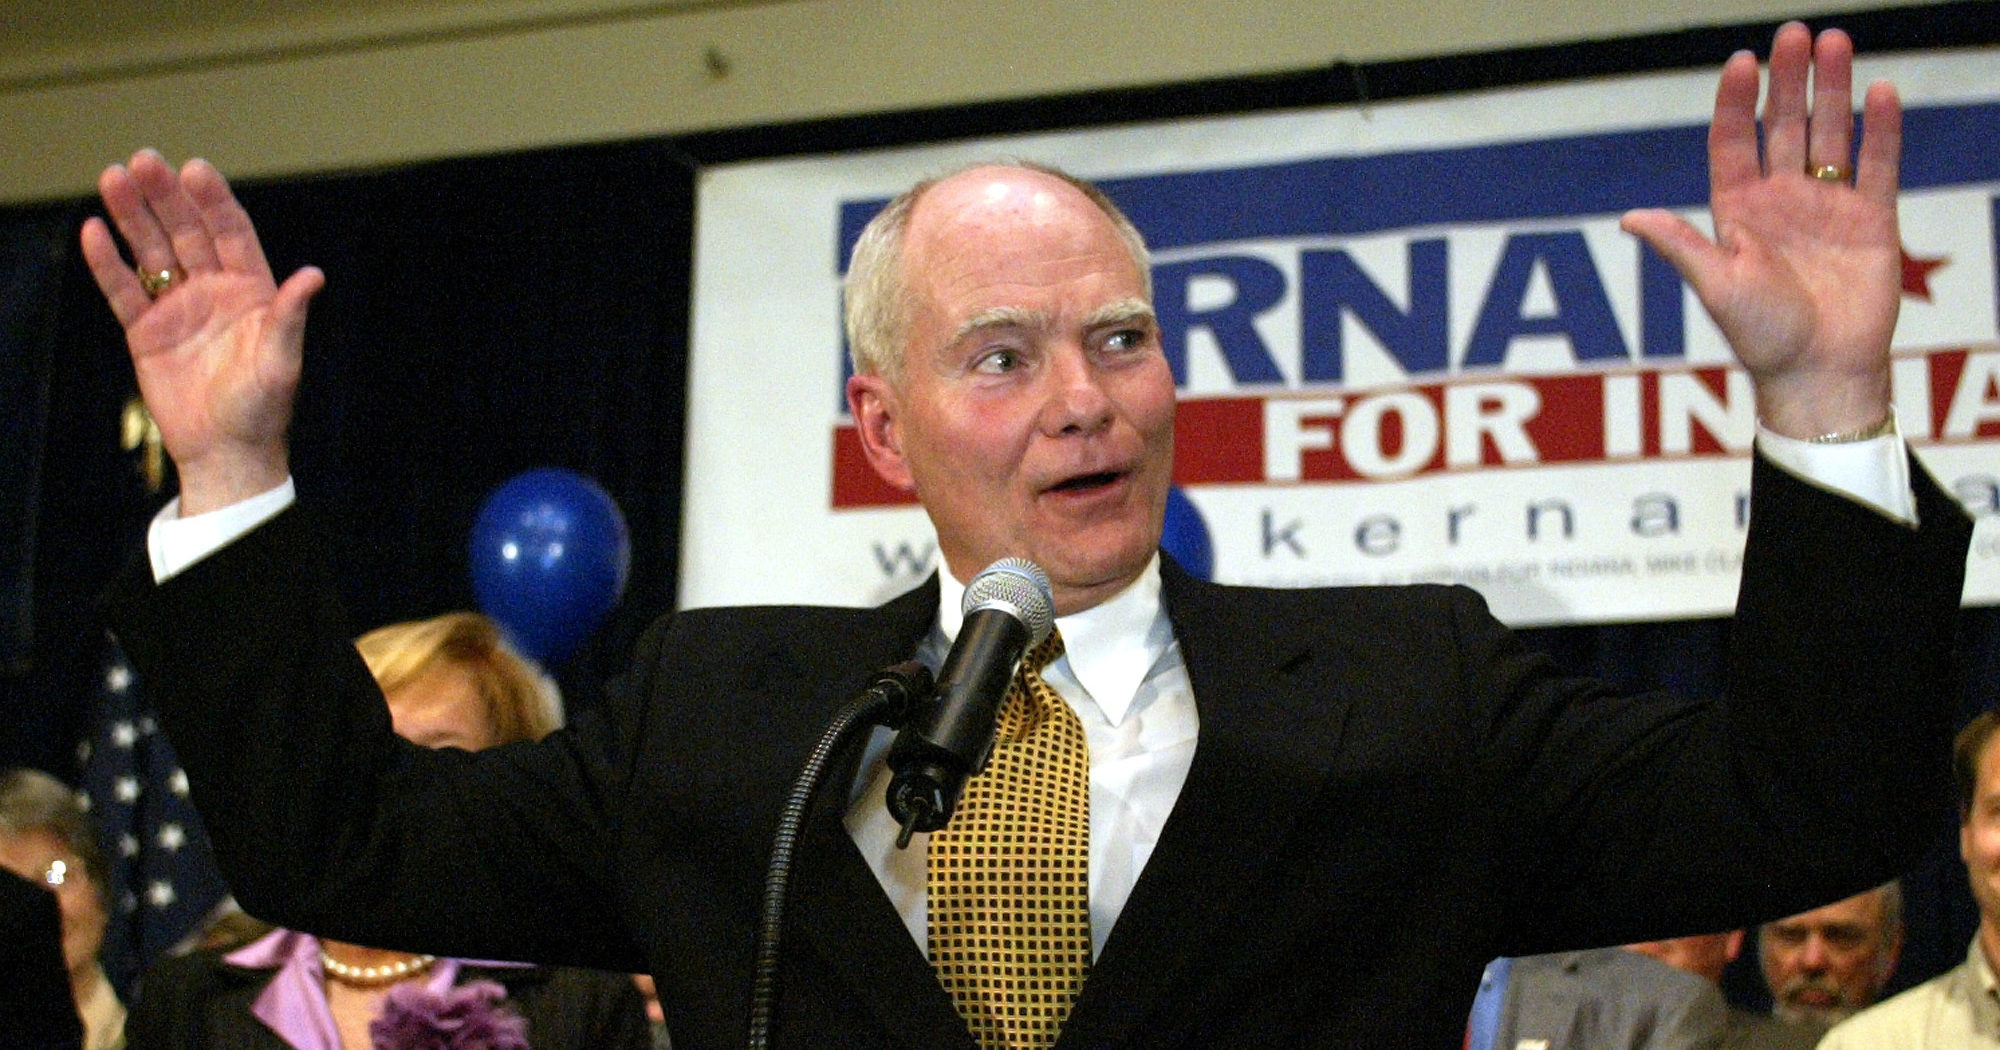 In this Nov. 2, 2004, file photo, Indiana Gov. Joe Kernan concedes to Republican challenger Mitch Daniels in the race for Indiana governor in Indianapolis. Kernan died at age 74 on July 29, 2020, at a South Bend health care facility.